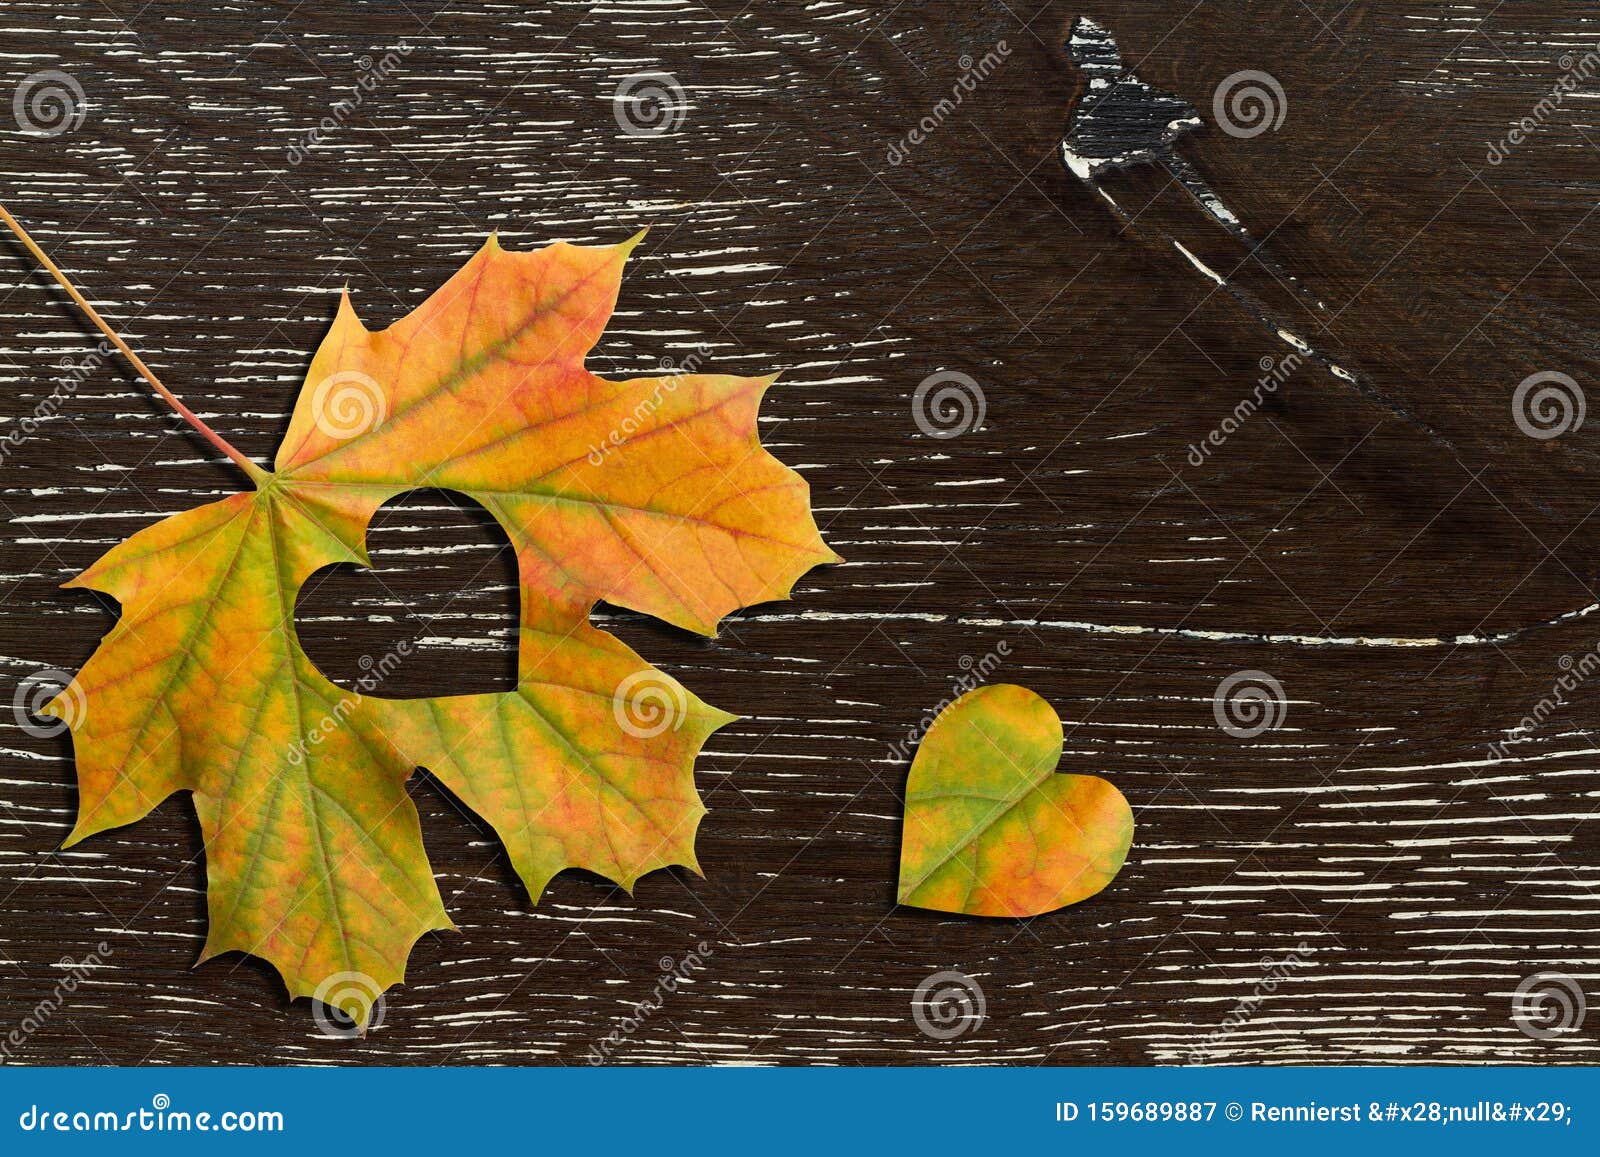 Autumn Red and Orange Leaves with Heart. Fall Wooden Background Stock ...